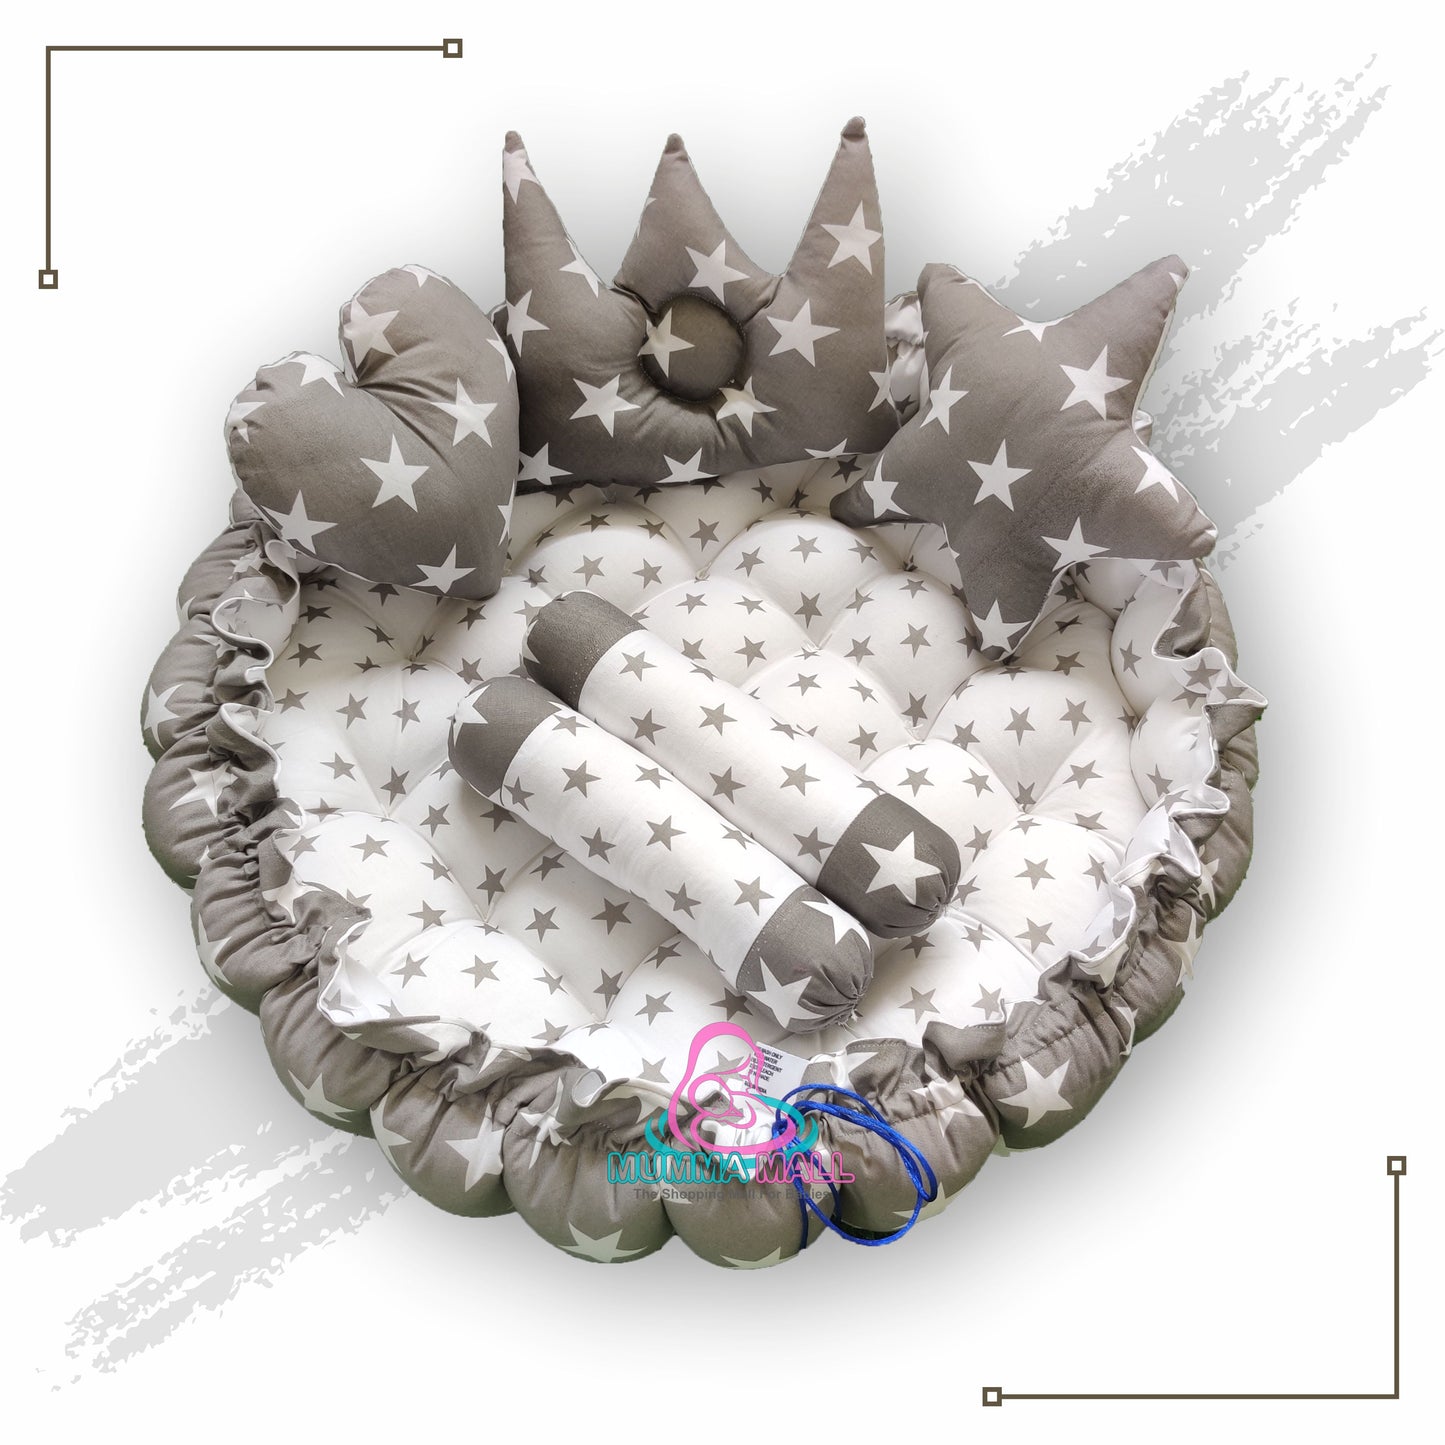 Round baby tub bed with blanket and set of 5 pillows as neck support, side support and toy (Grey and White)